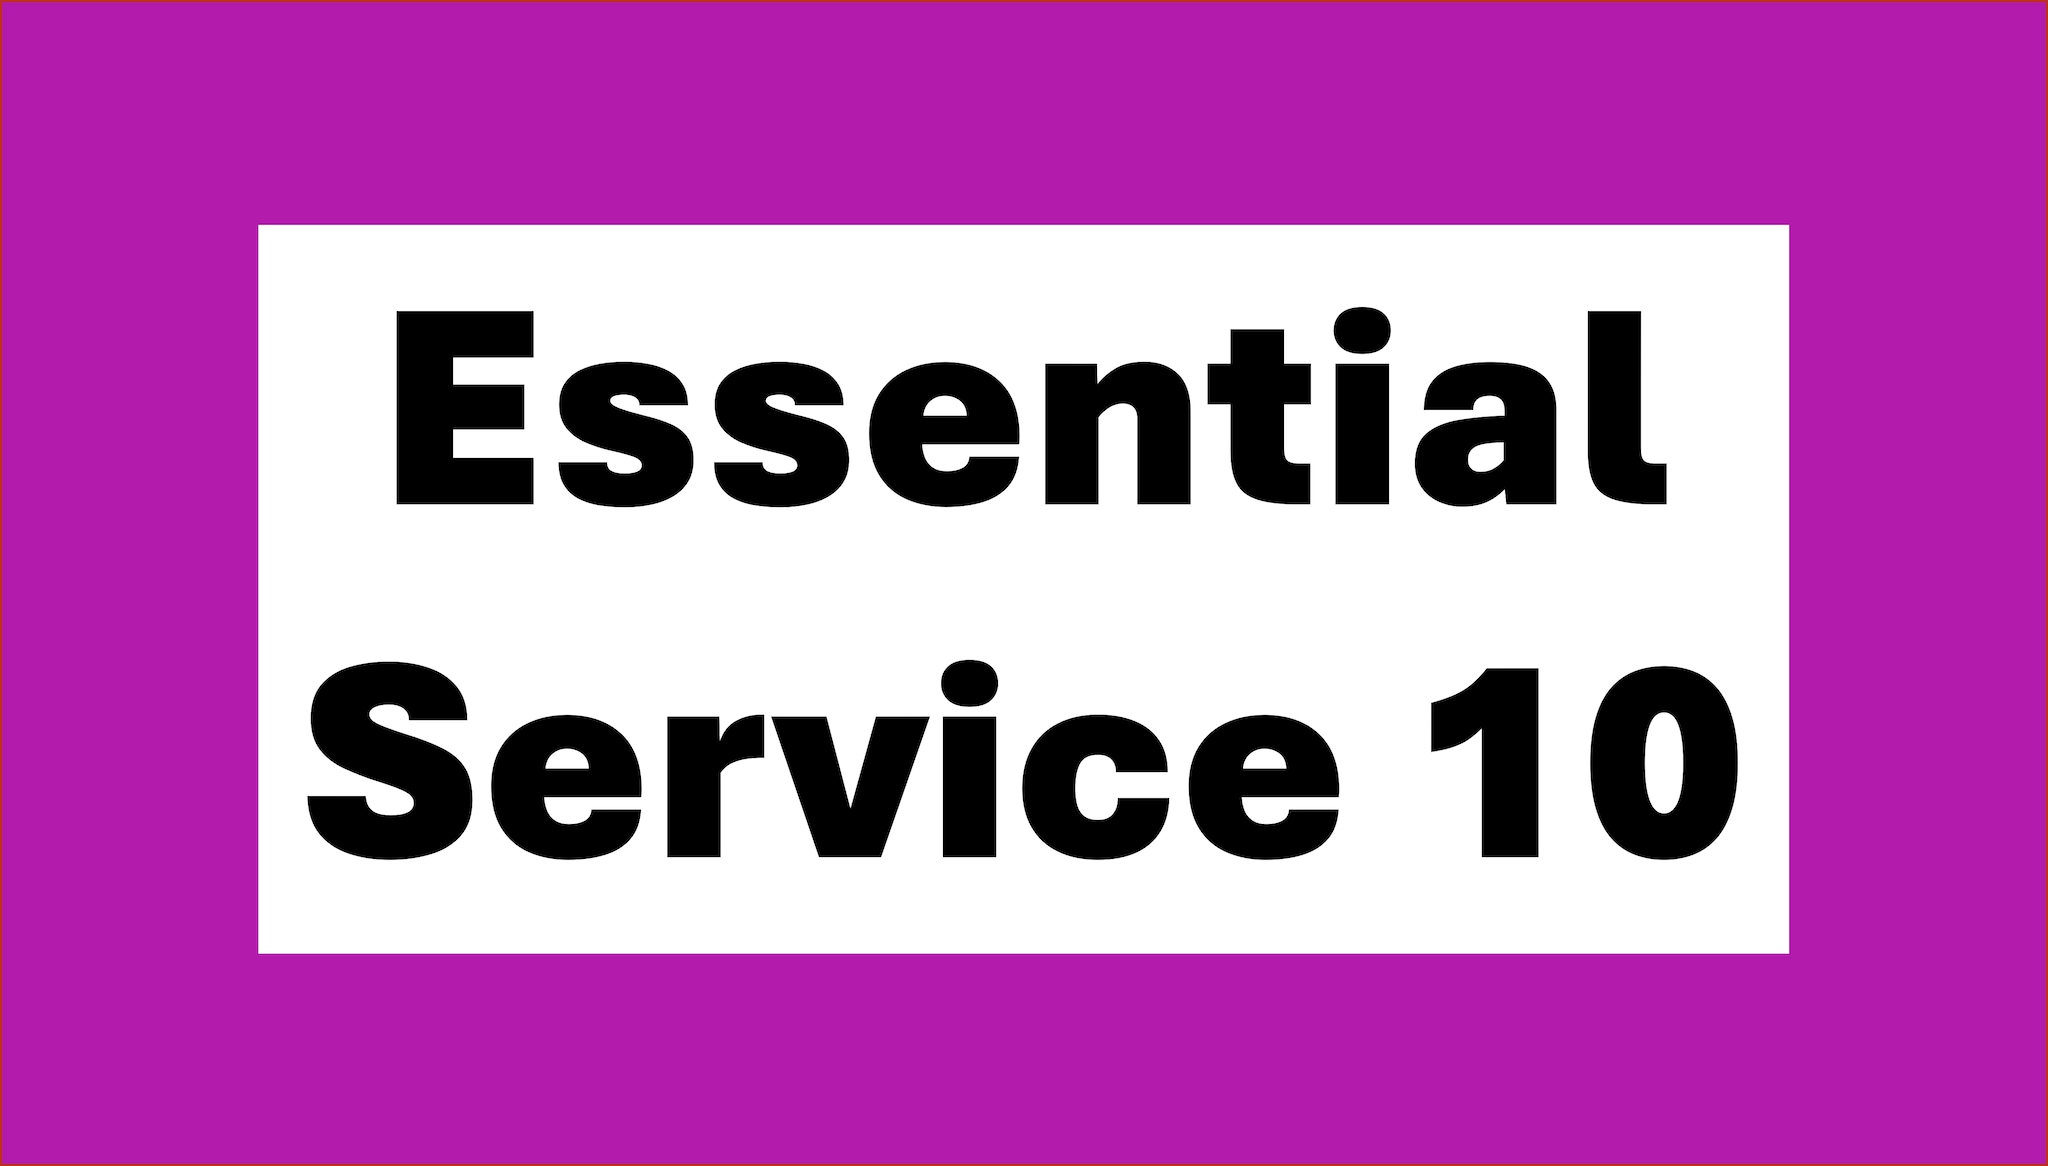 Violet graphic with black text in white box reading Essential Service 10